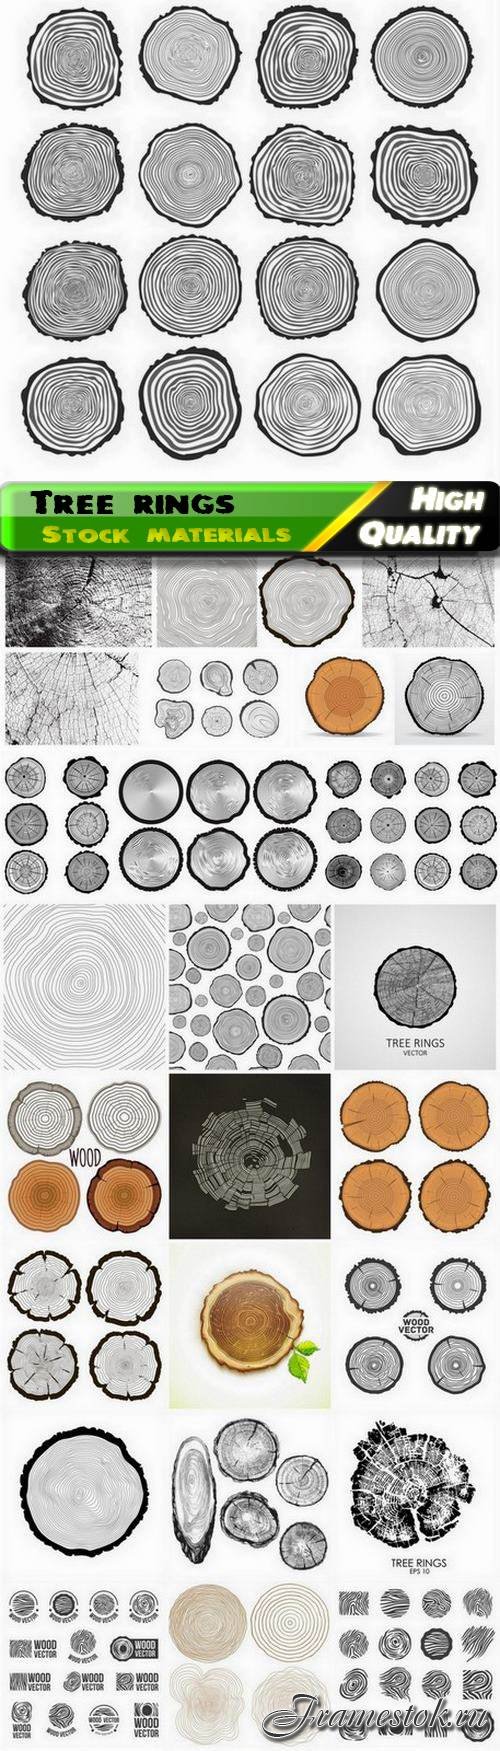 Tree rings and wood slices textures illustration 25 Eps